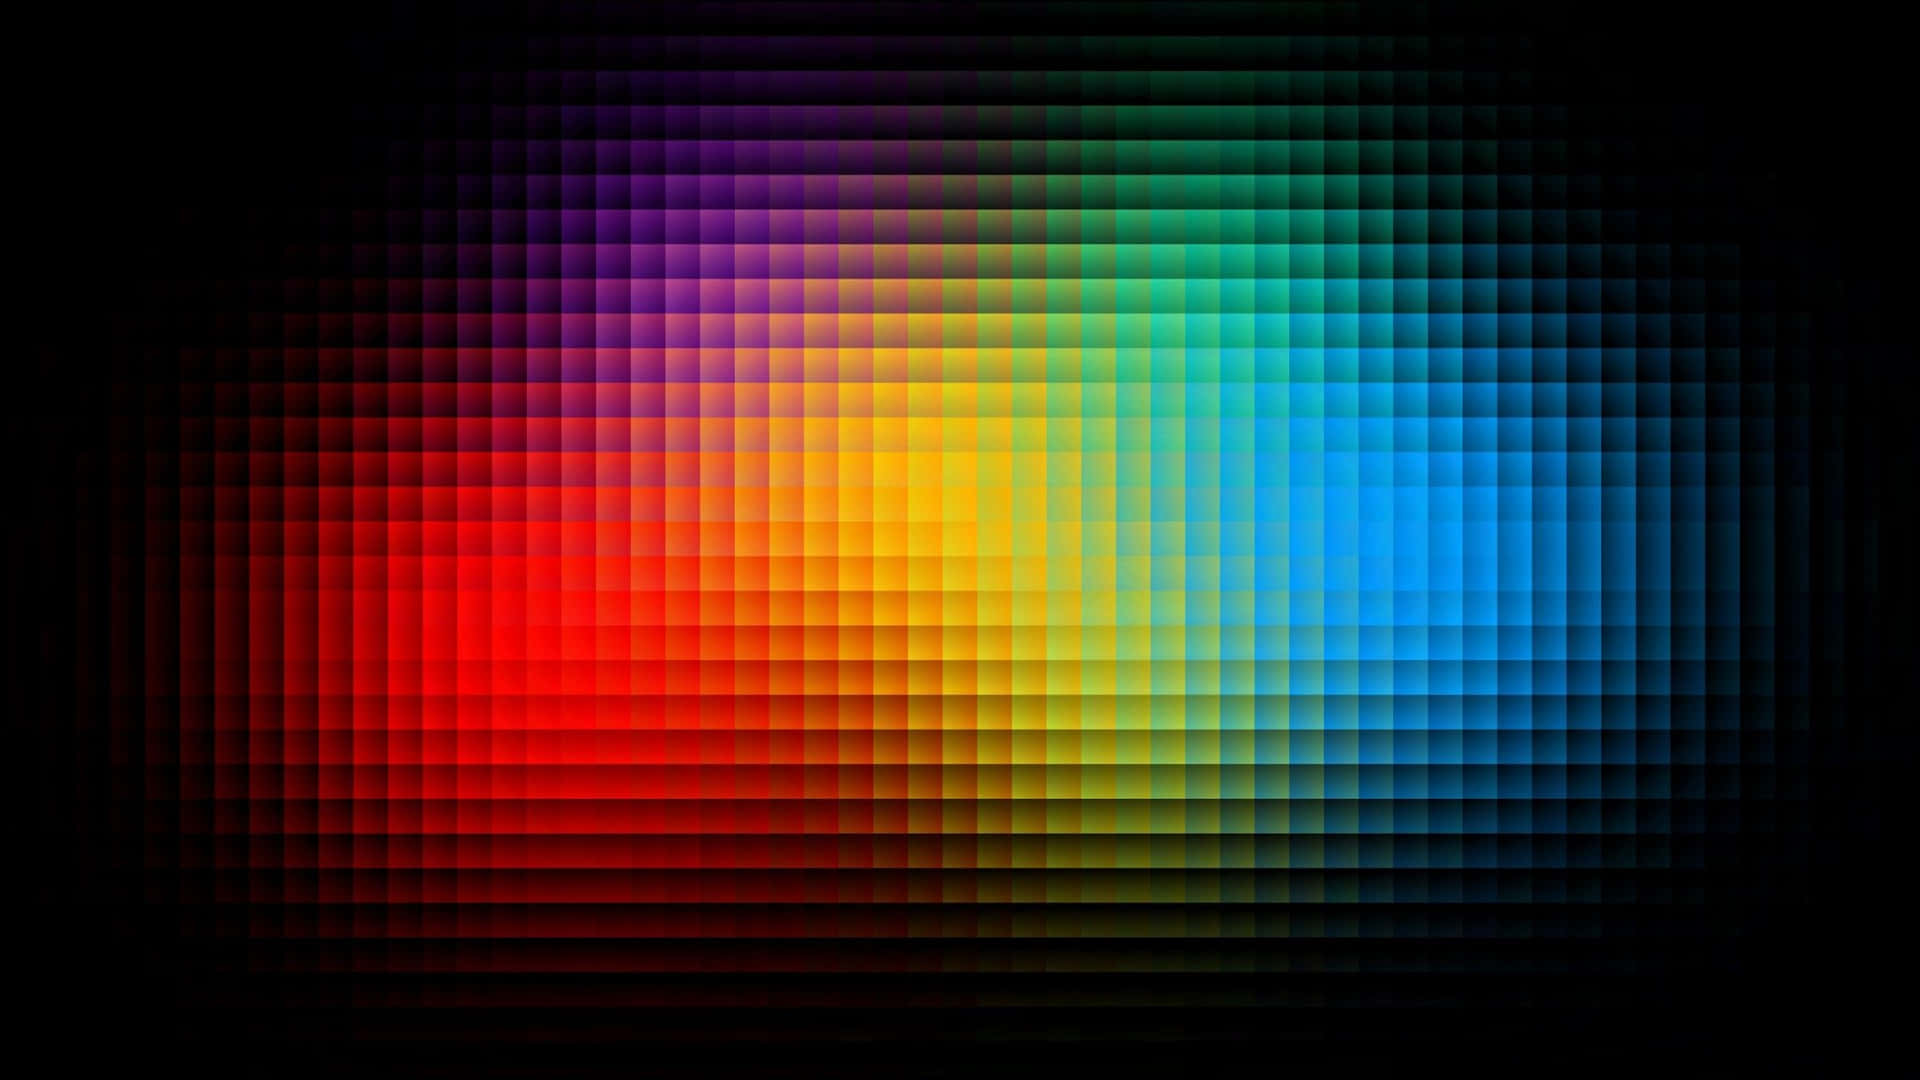 A Colorful Background With Squares Of Different Colors Background